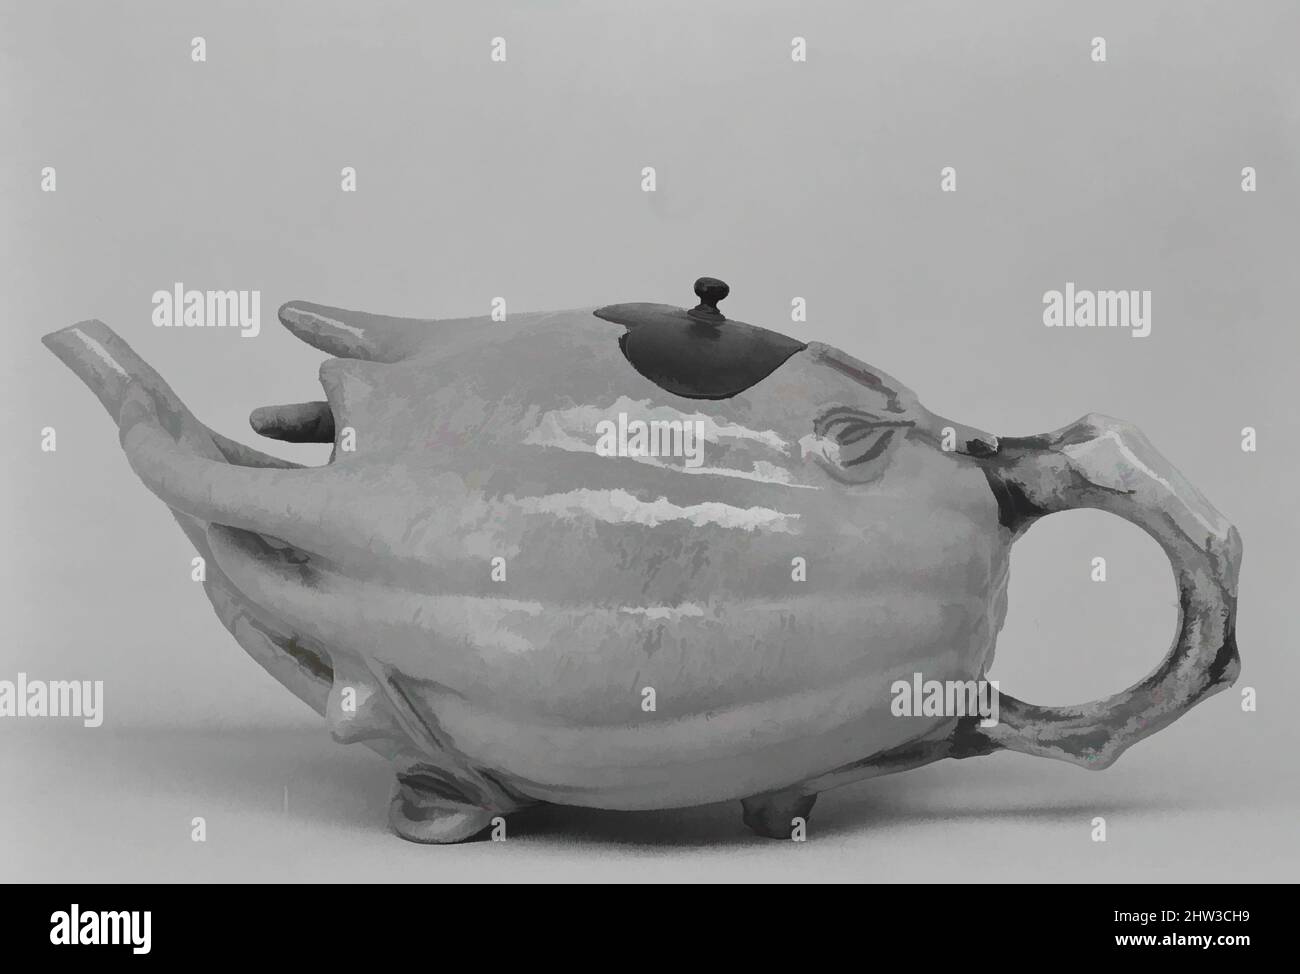 https://c8.alamy.com/comp/2HW3CH9/art-inspired-by-teapot-in-the-shape-of-buddhas-hand-citron-qing-dynasty-16441911-19th-century-china-stoneware-with-colored-glazes-possibly-glazed-yixing-ware-jiangsu-province-h-3-14-in-83-cm-w-7-34-in-197-cm-ceramics-classic-works-modernized-by-artotop-with-a-splash-of-modernity-shapes-color-and-value-eye-catching-visual-impact-on-art-emotions-through-freedom-of-artworks-in-a-contemporary-way-a-timeless-message-pursuing-a-wildly-creative-new-direction-artists-turning-to-the-digital-medium-and-creating-the-artotop-nft-2HW3CH9.jpg